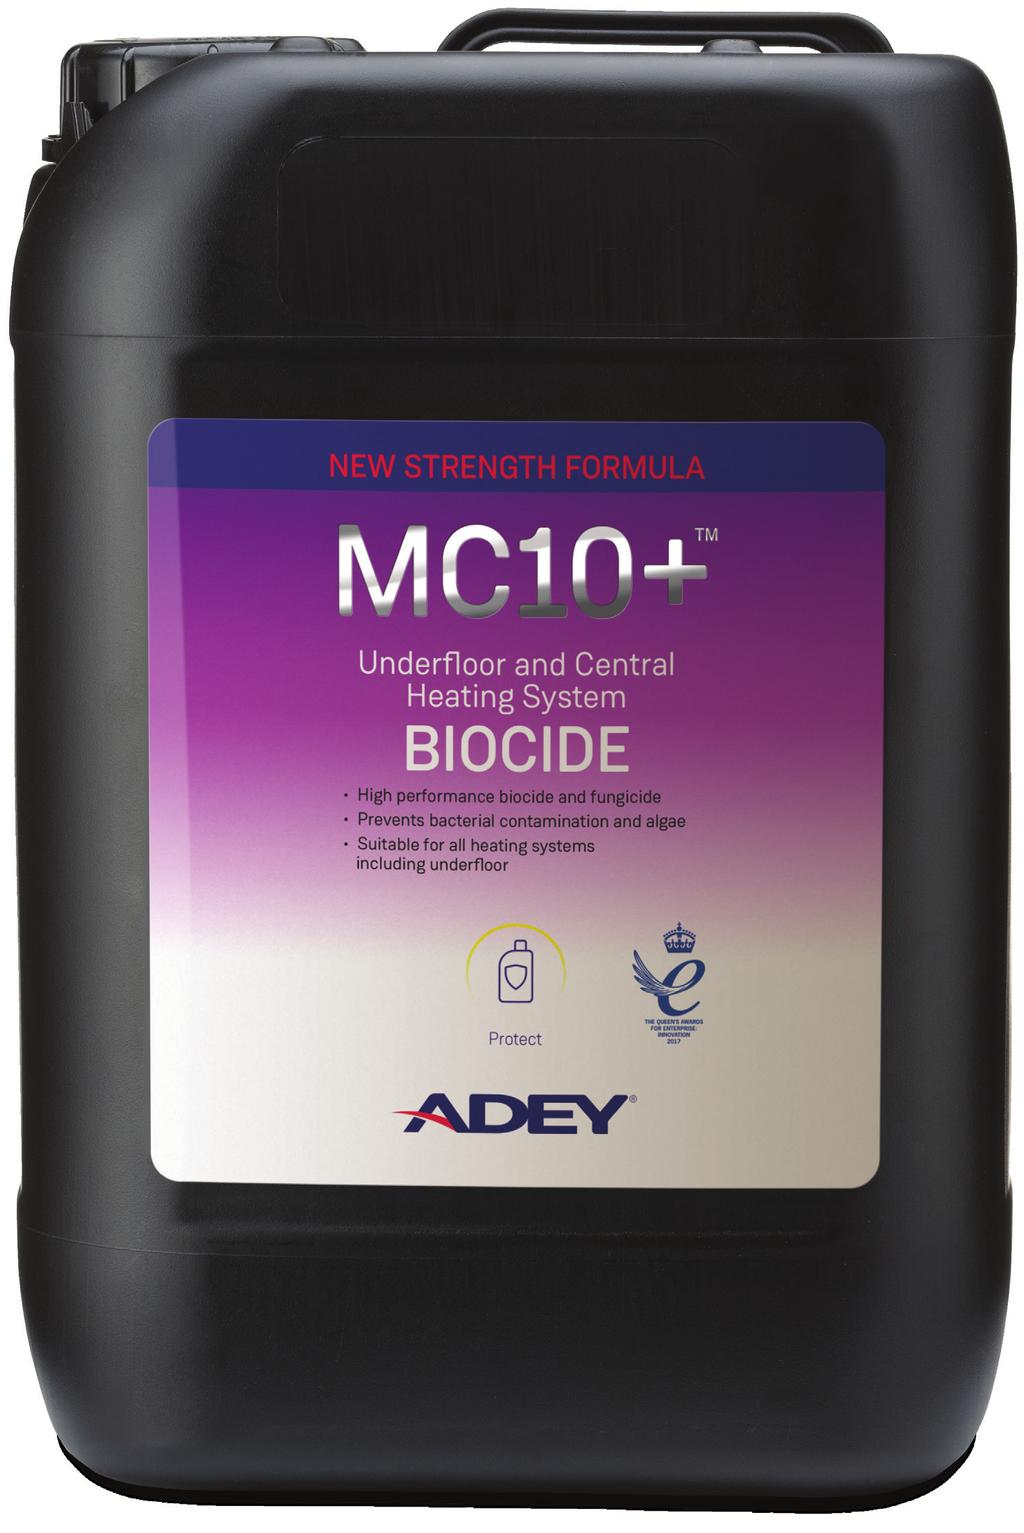 Underfloor and Central Heating System BIOCIDE MC10+ is a concentrated dual biocide to prevent the formation and growth of bacterial contamination, algae and micro-organisms in underfloor and central